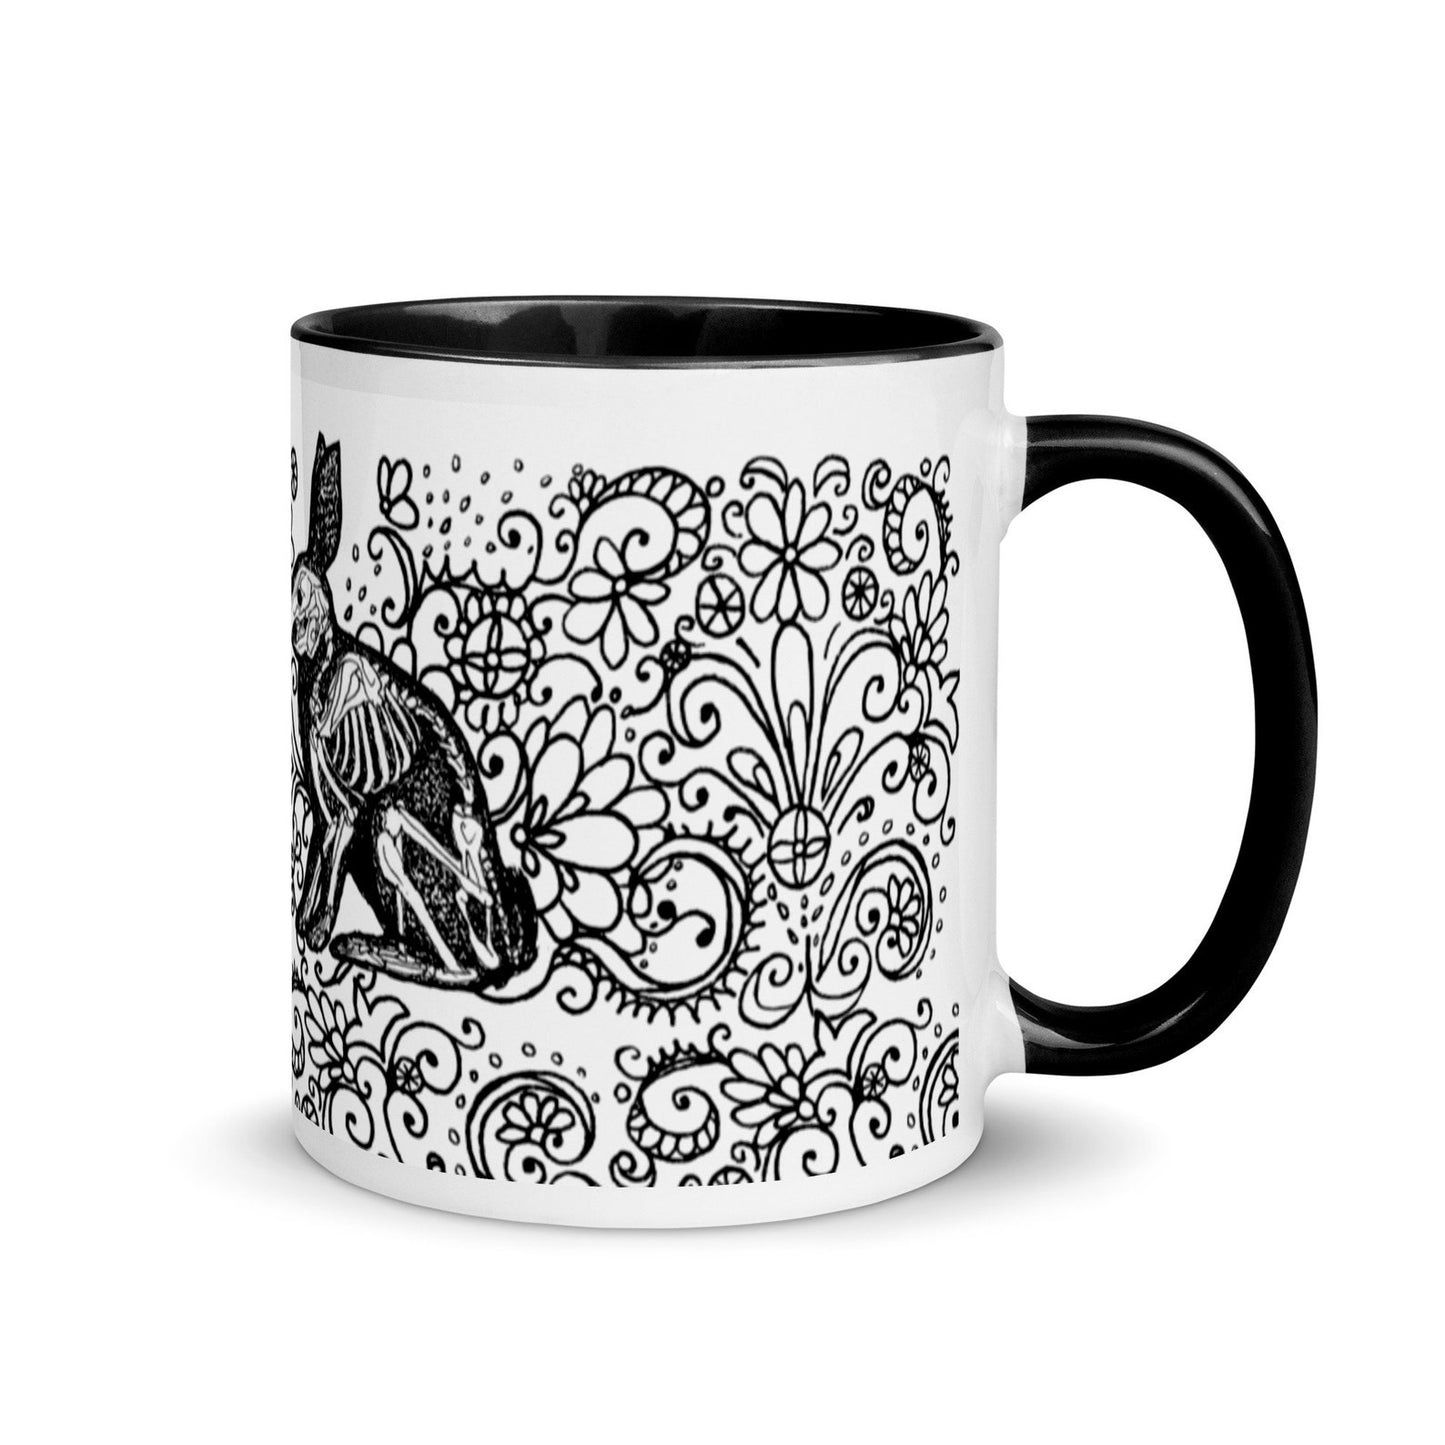 ceramic halloween mug. Two black bunny rabbit silhouettes with their skeletons visible, on a field of elaborate, black, floral swirls on a white background. side view showing a black handle.